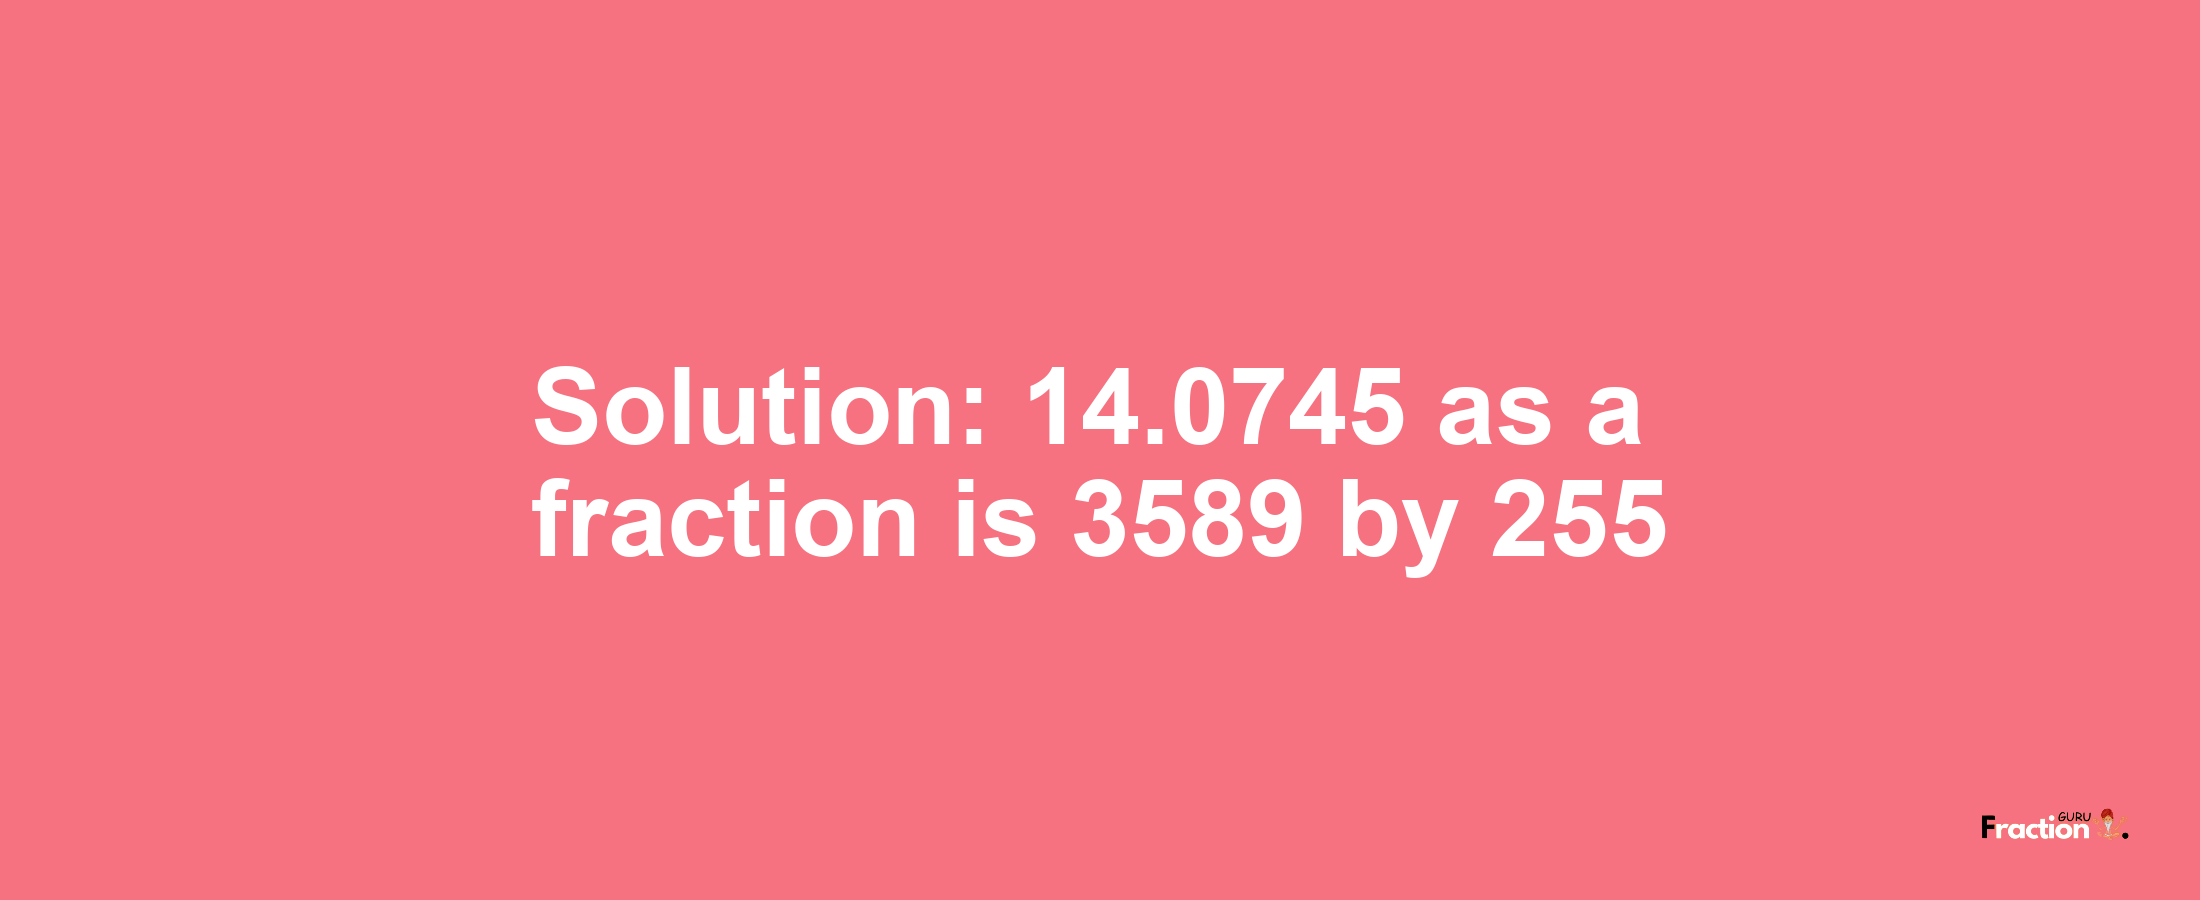 Solution:14.0745 as a fraction is 3589/255